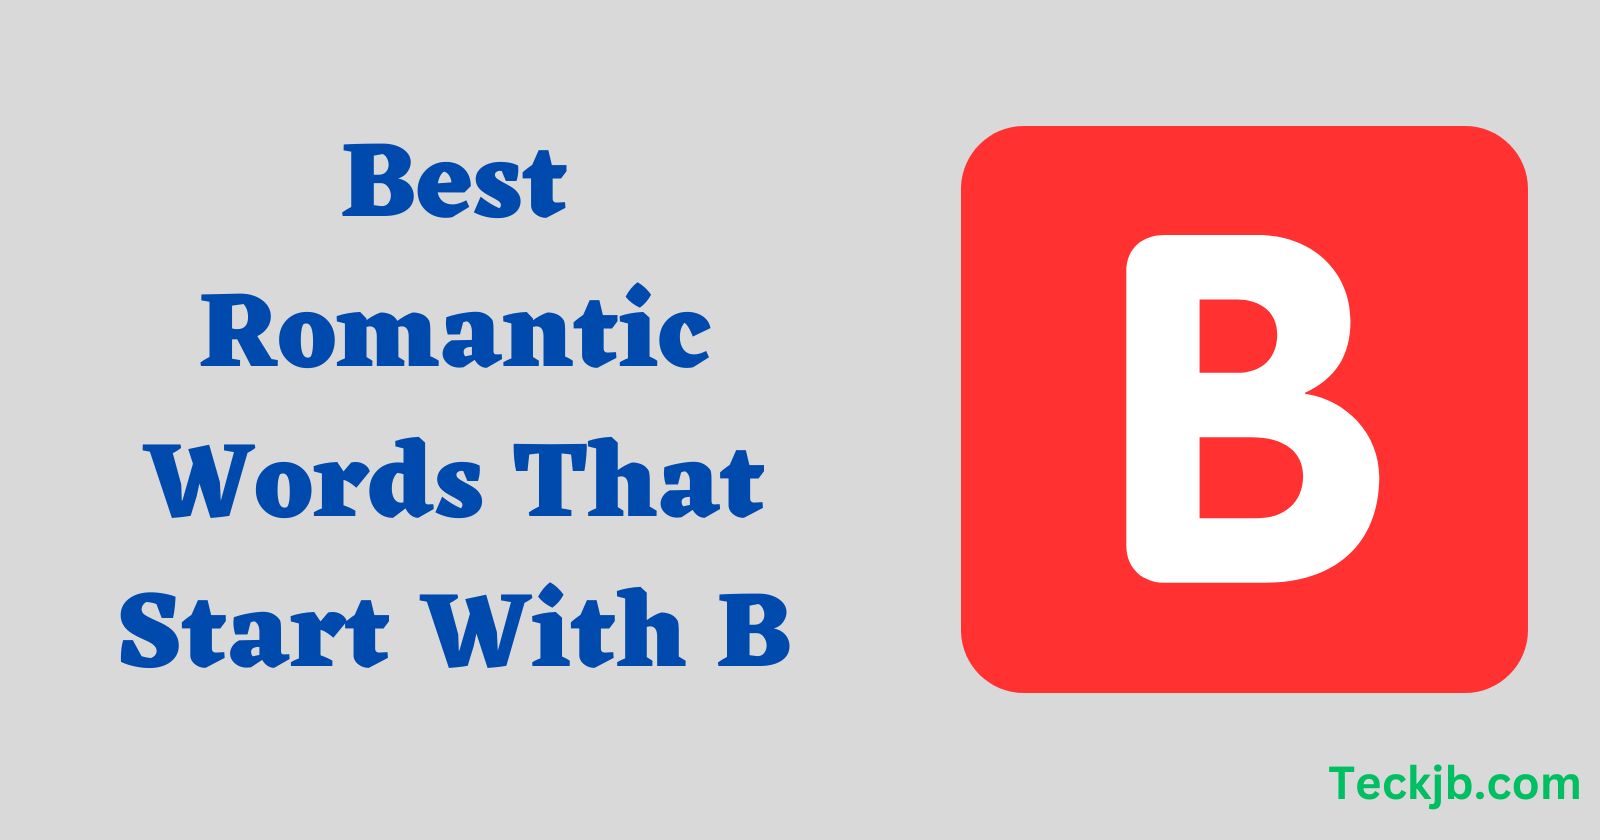 Romantic Words That Start With B